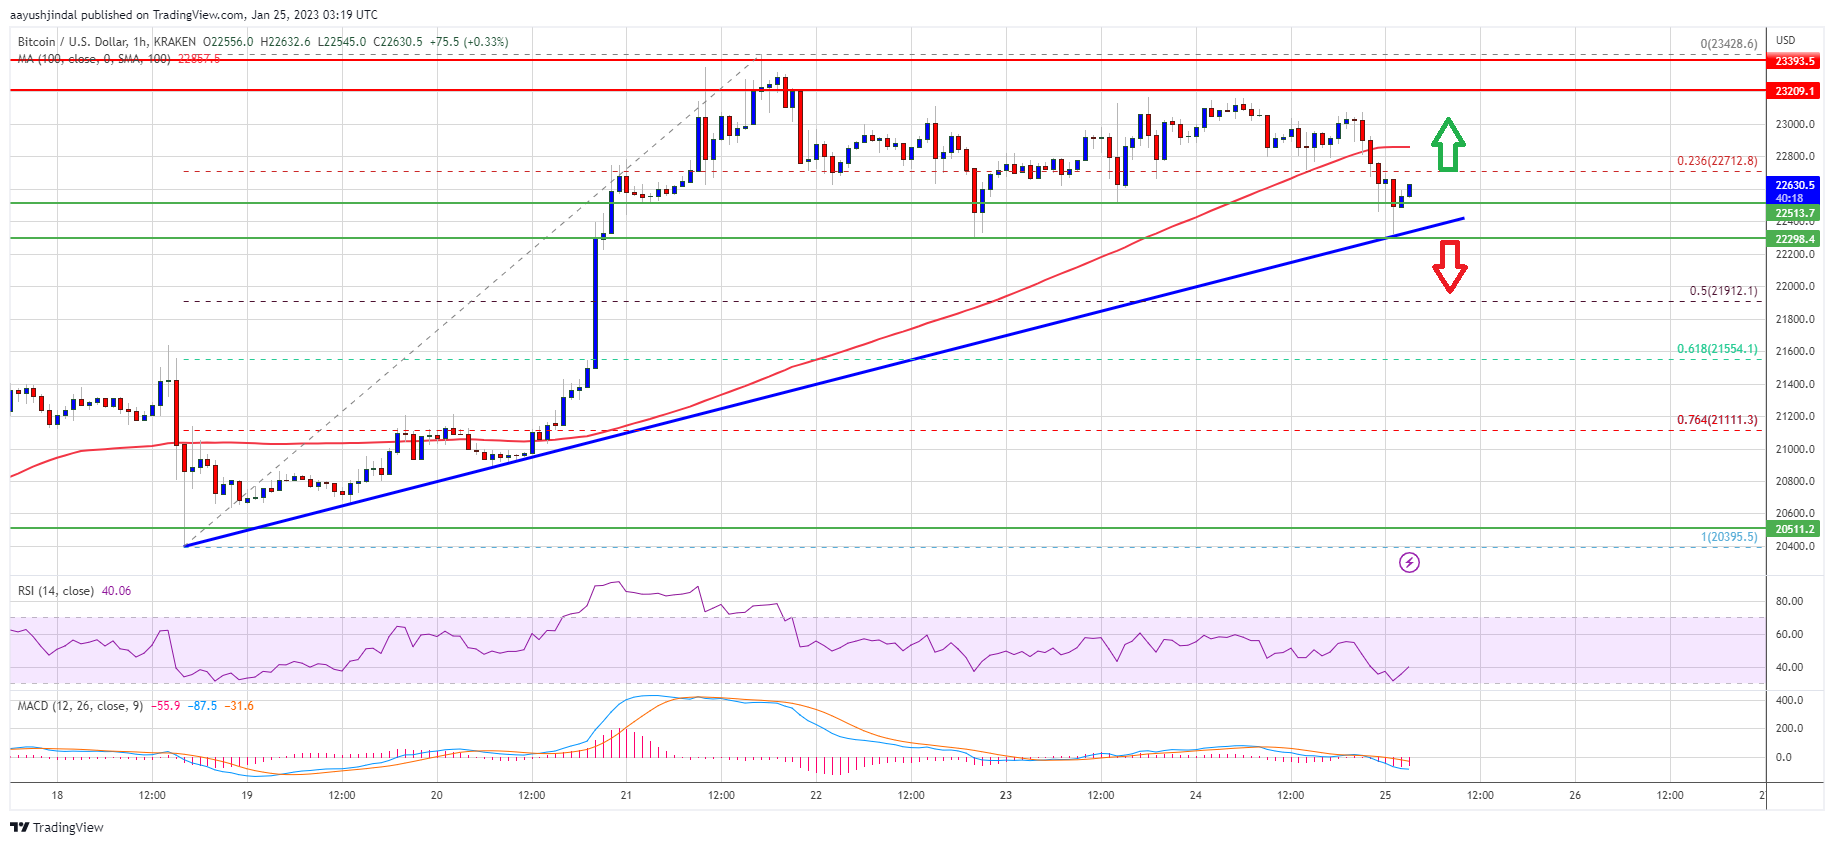 Bitcoin Price Just Saw Technical Correction But Key Uptrend Support Intact